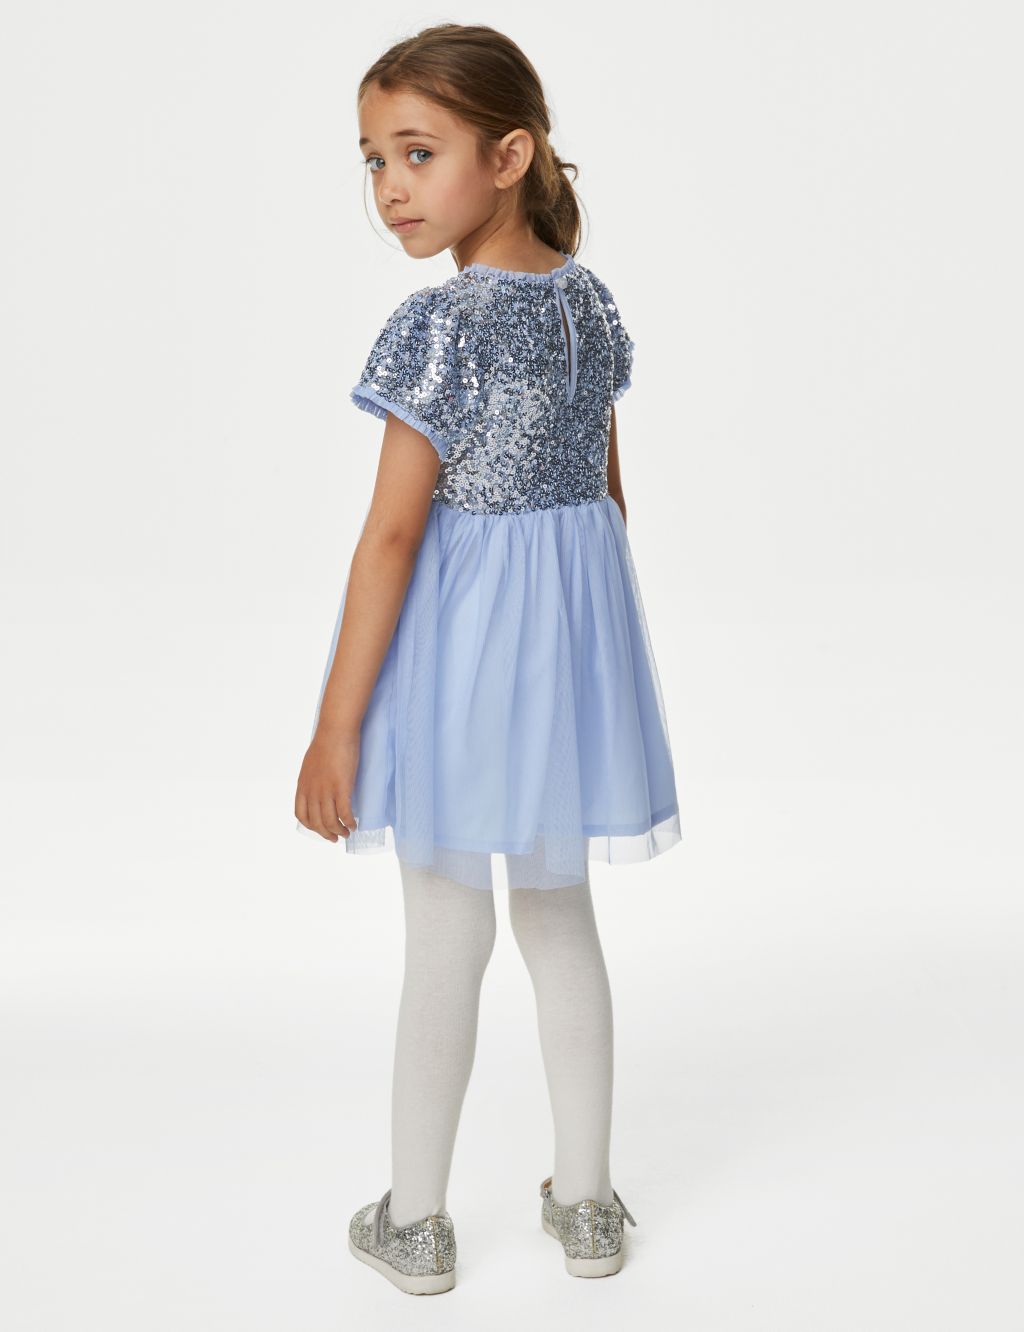 Frozen™ Sequin Tulle Dress (2-8 Yrs) image 4